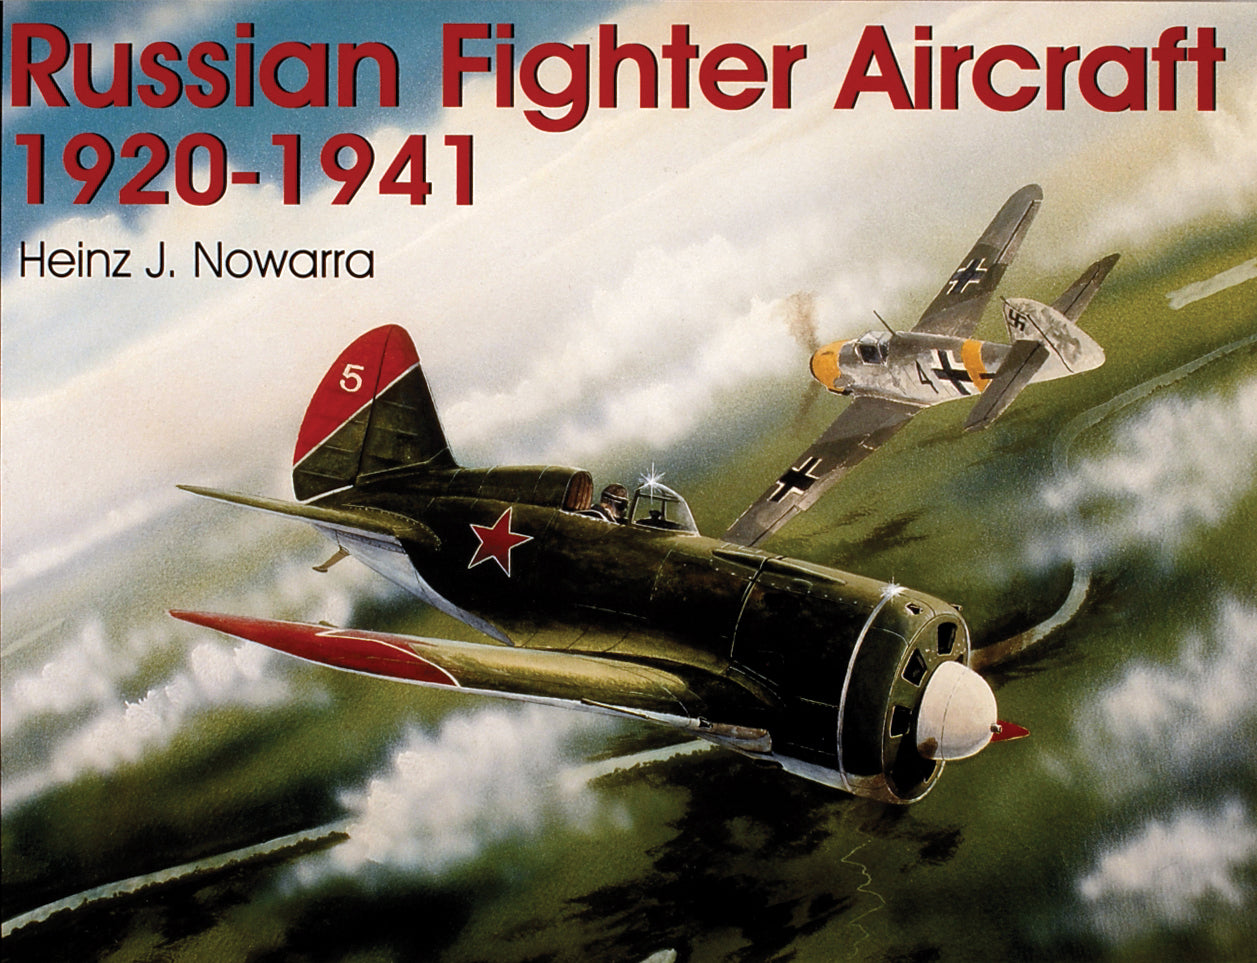 Russian Fighter Aircraft 1920-1941